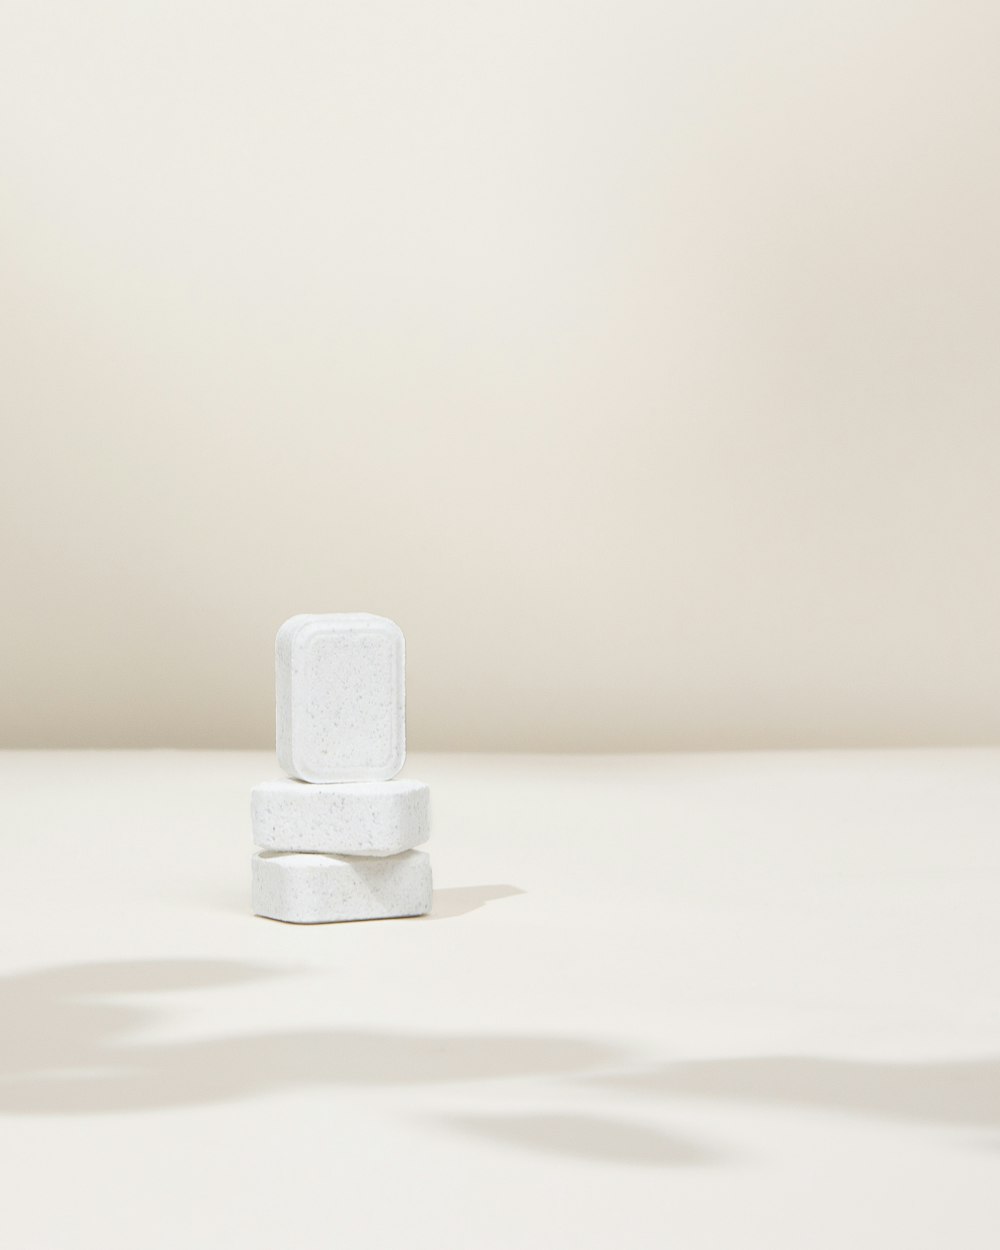 a small white object sitting on top of a table